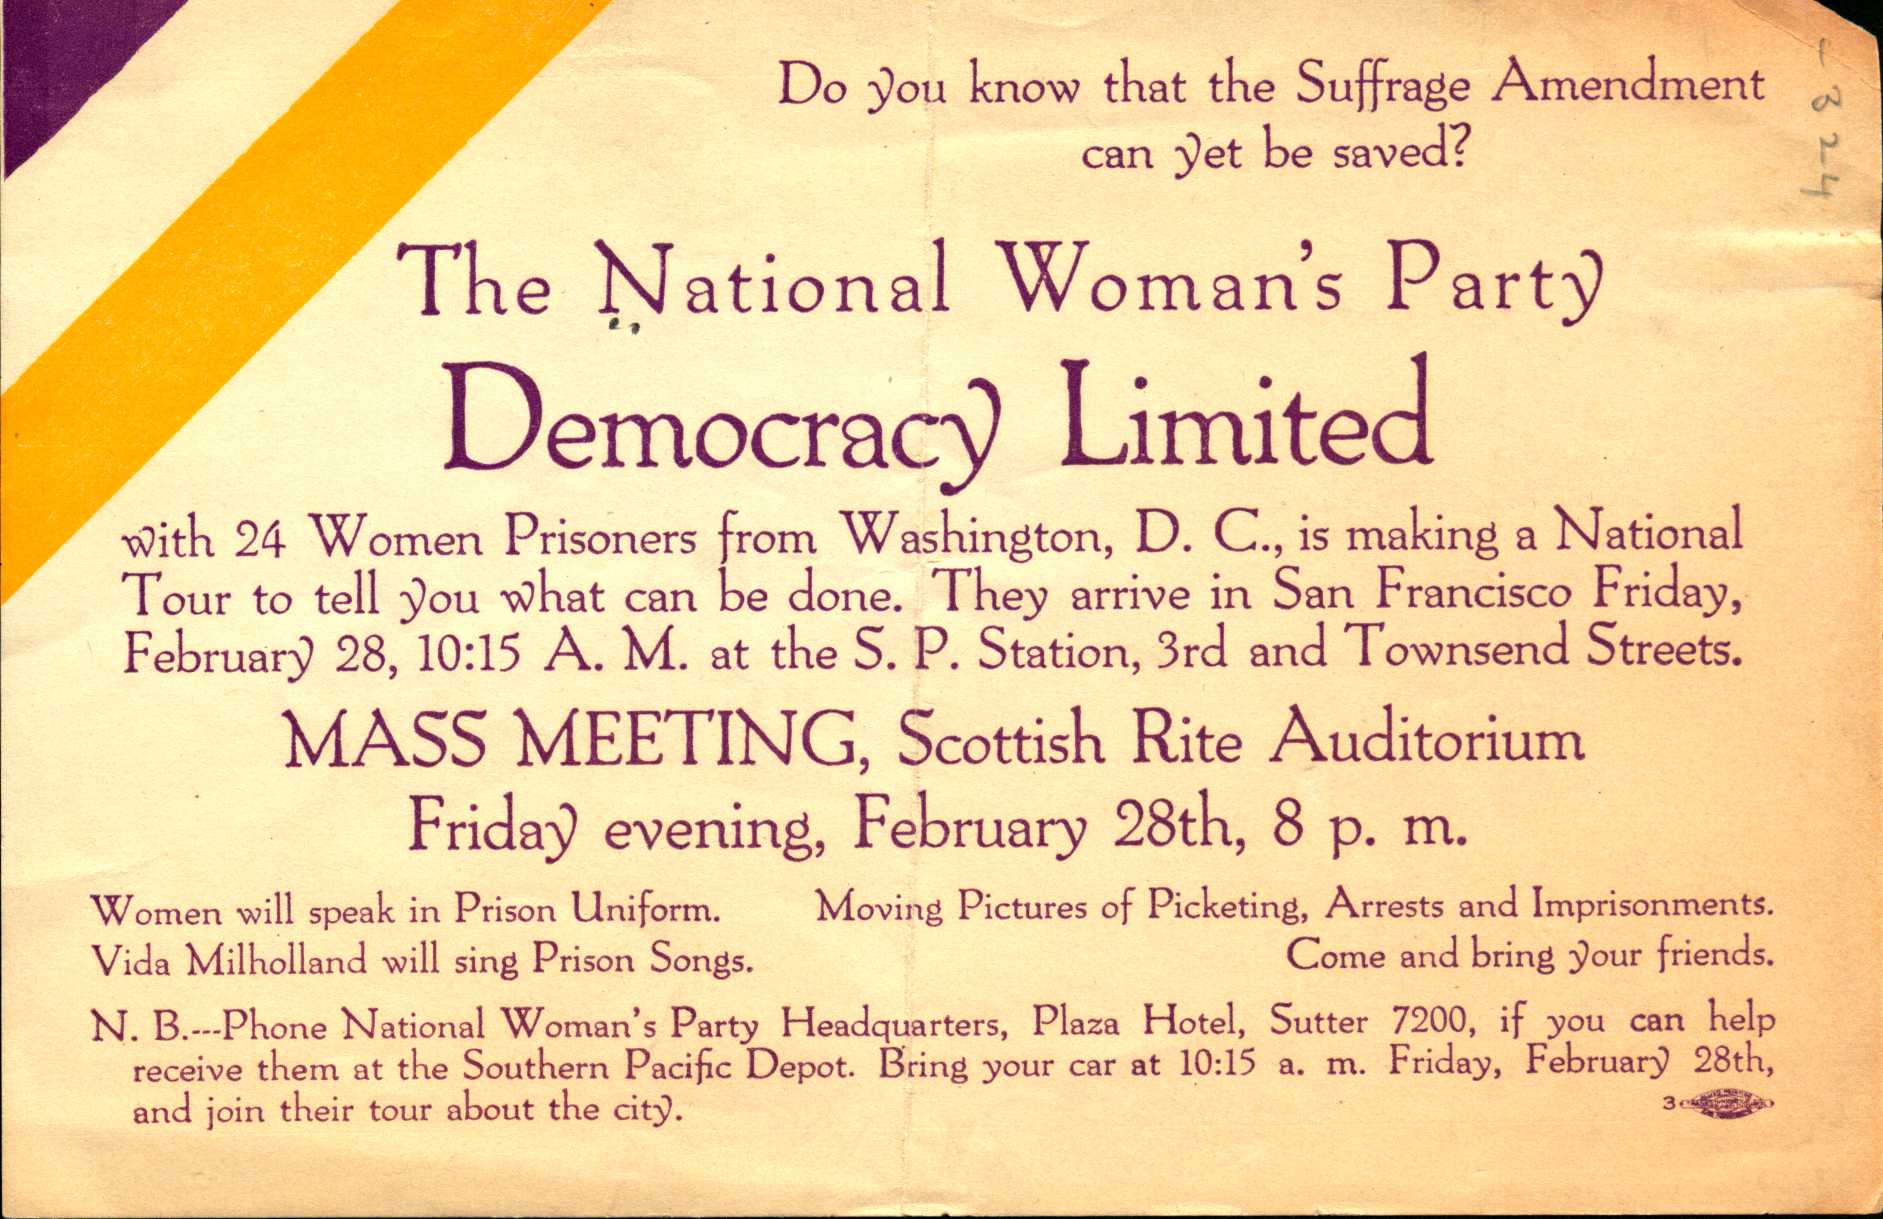 Shows information about a rally regarding the suffrage amendment including general speaker information